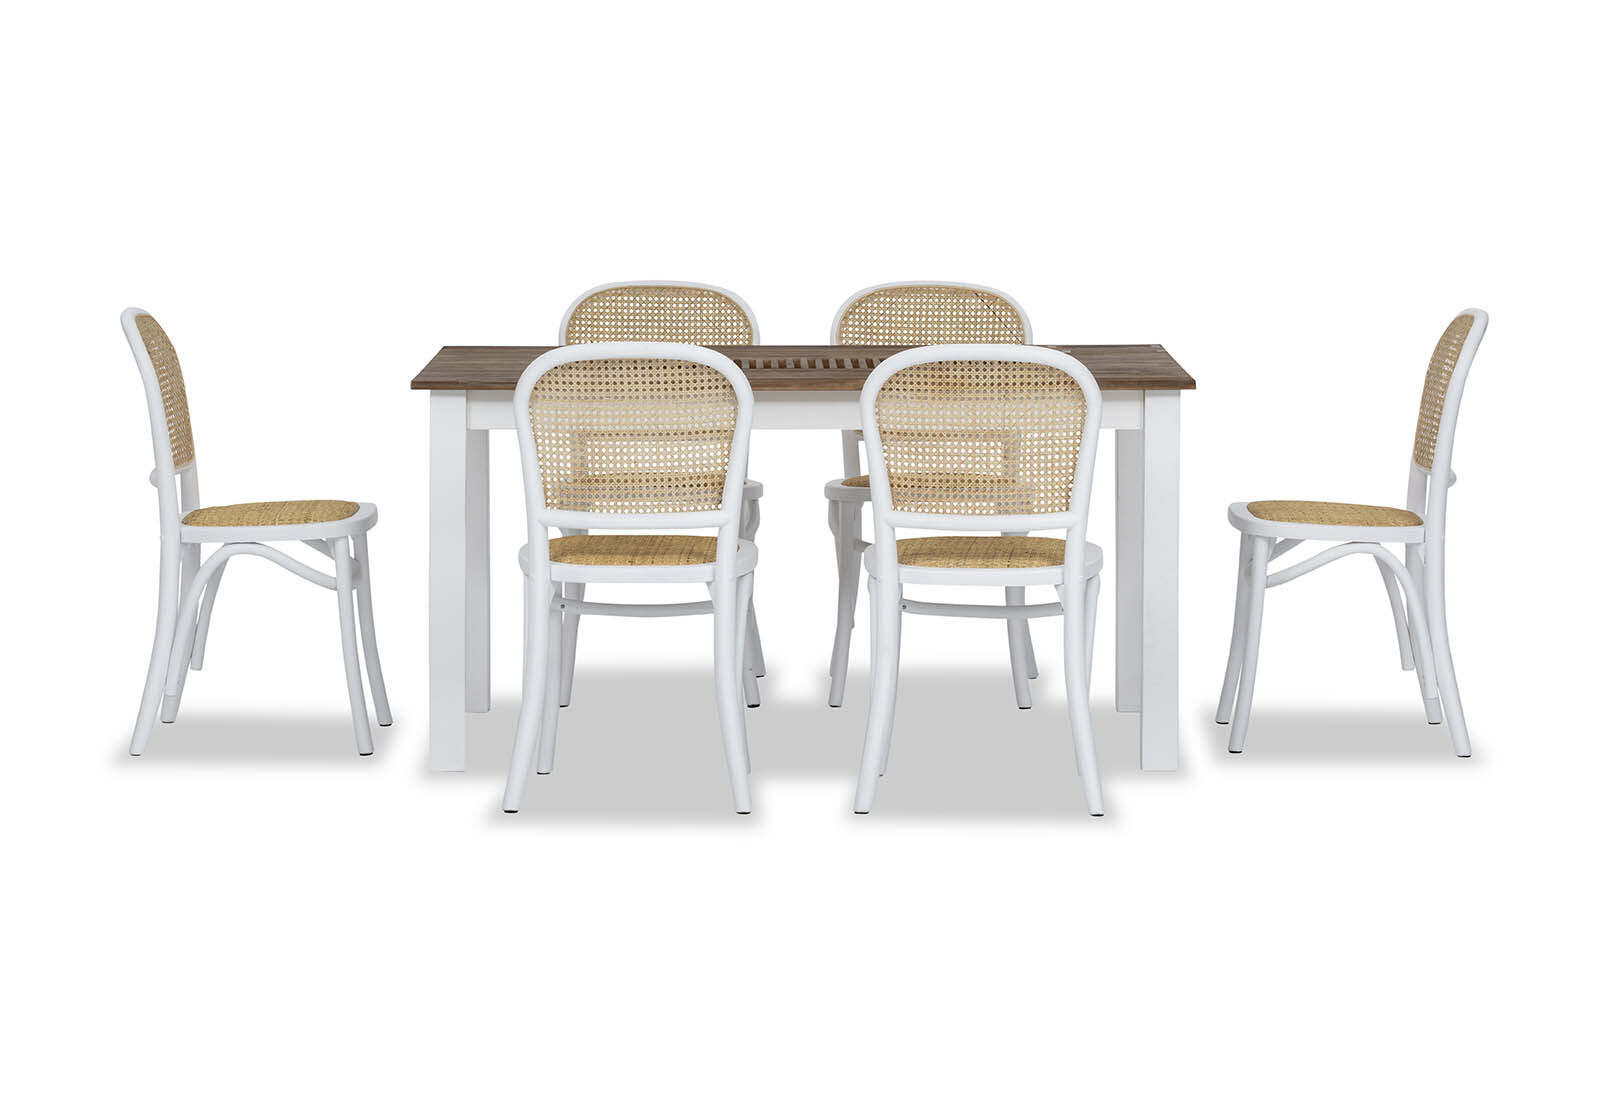 SANTO ANDRE 7 Piece Dining Suite with Toulouse Dining Chairs.